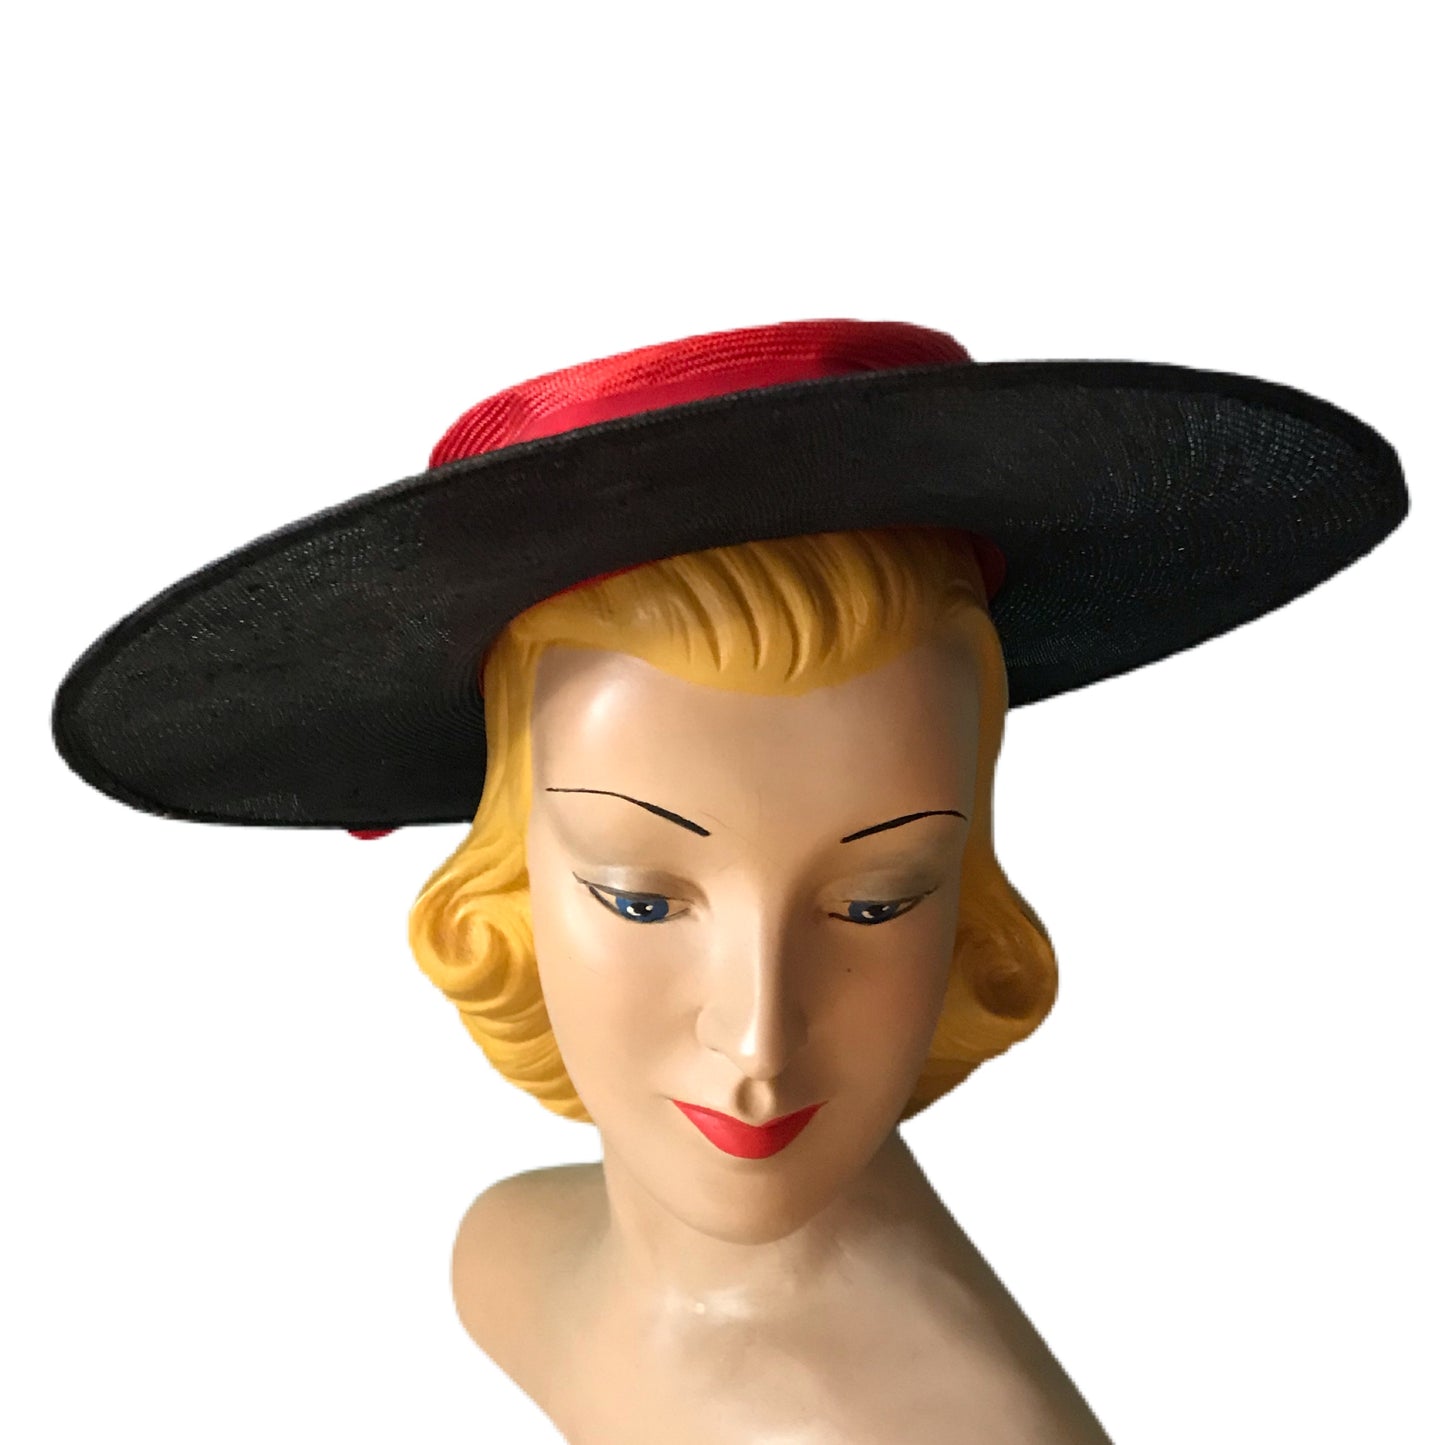 Black and Red Wide Brimmed Hat with Red Poppy and Bow circa 1960s